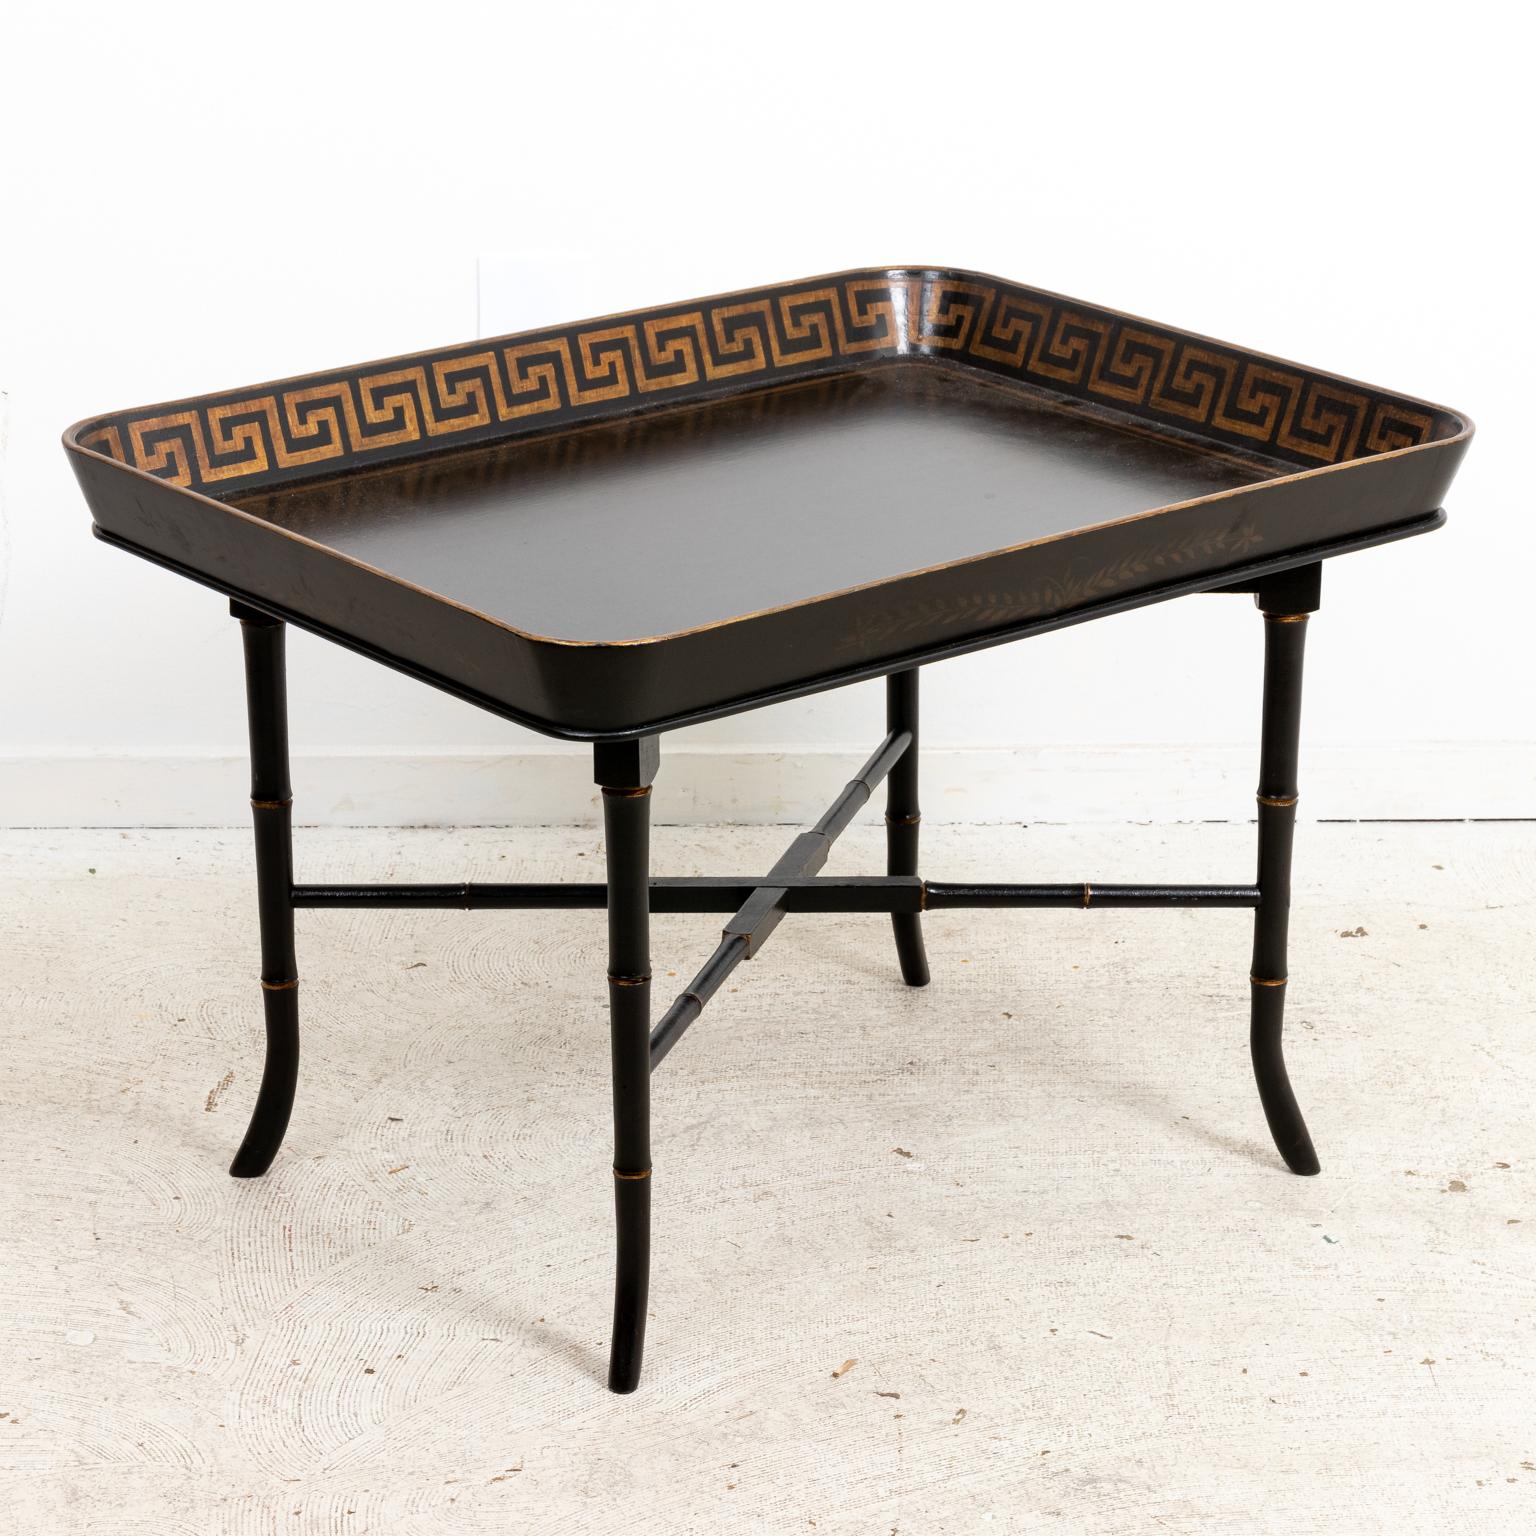 Decorative tray table for drinks or coffee detailed with Greek Key trim as seen on the inside gallery of the tabletop. The table is supported by faux bamboo legs and an x-shaped cross stretcher. Please note of wear consistent with age including